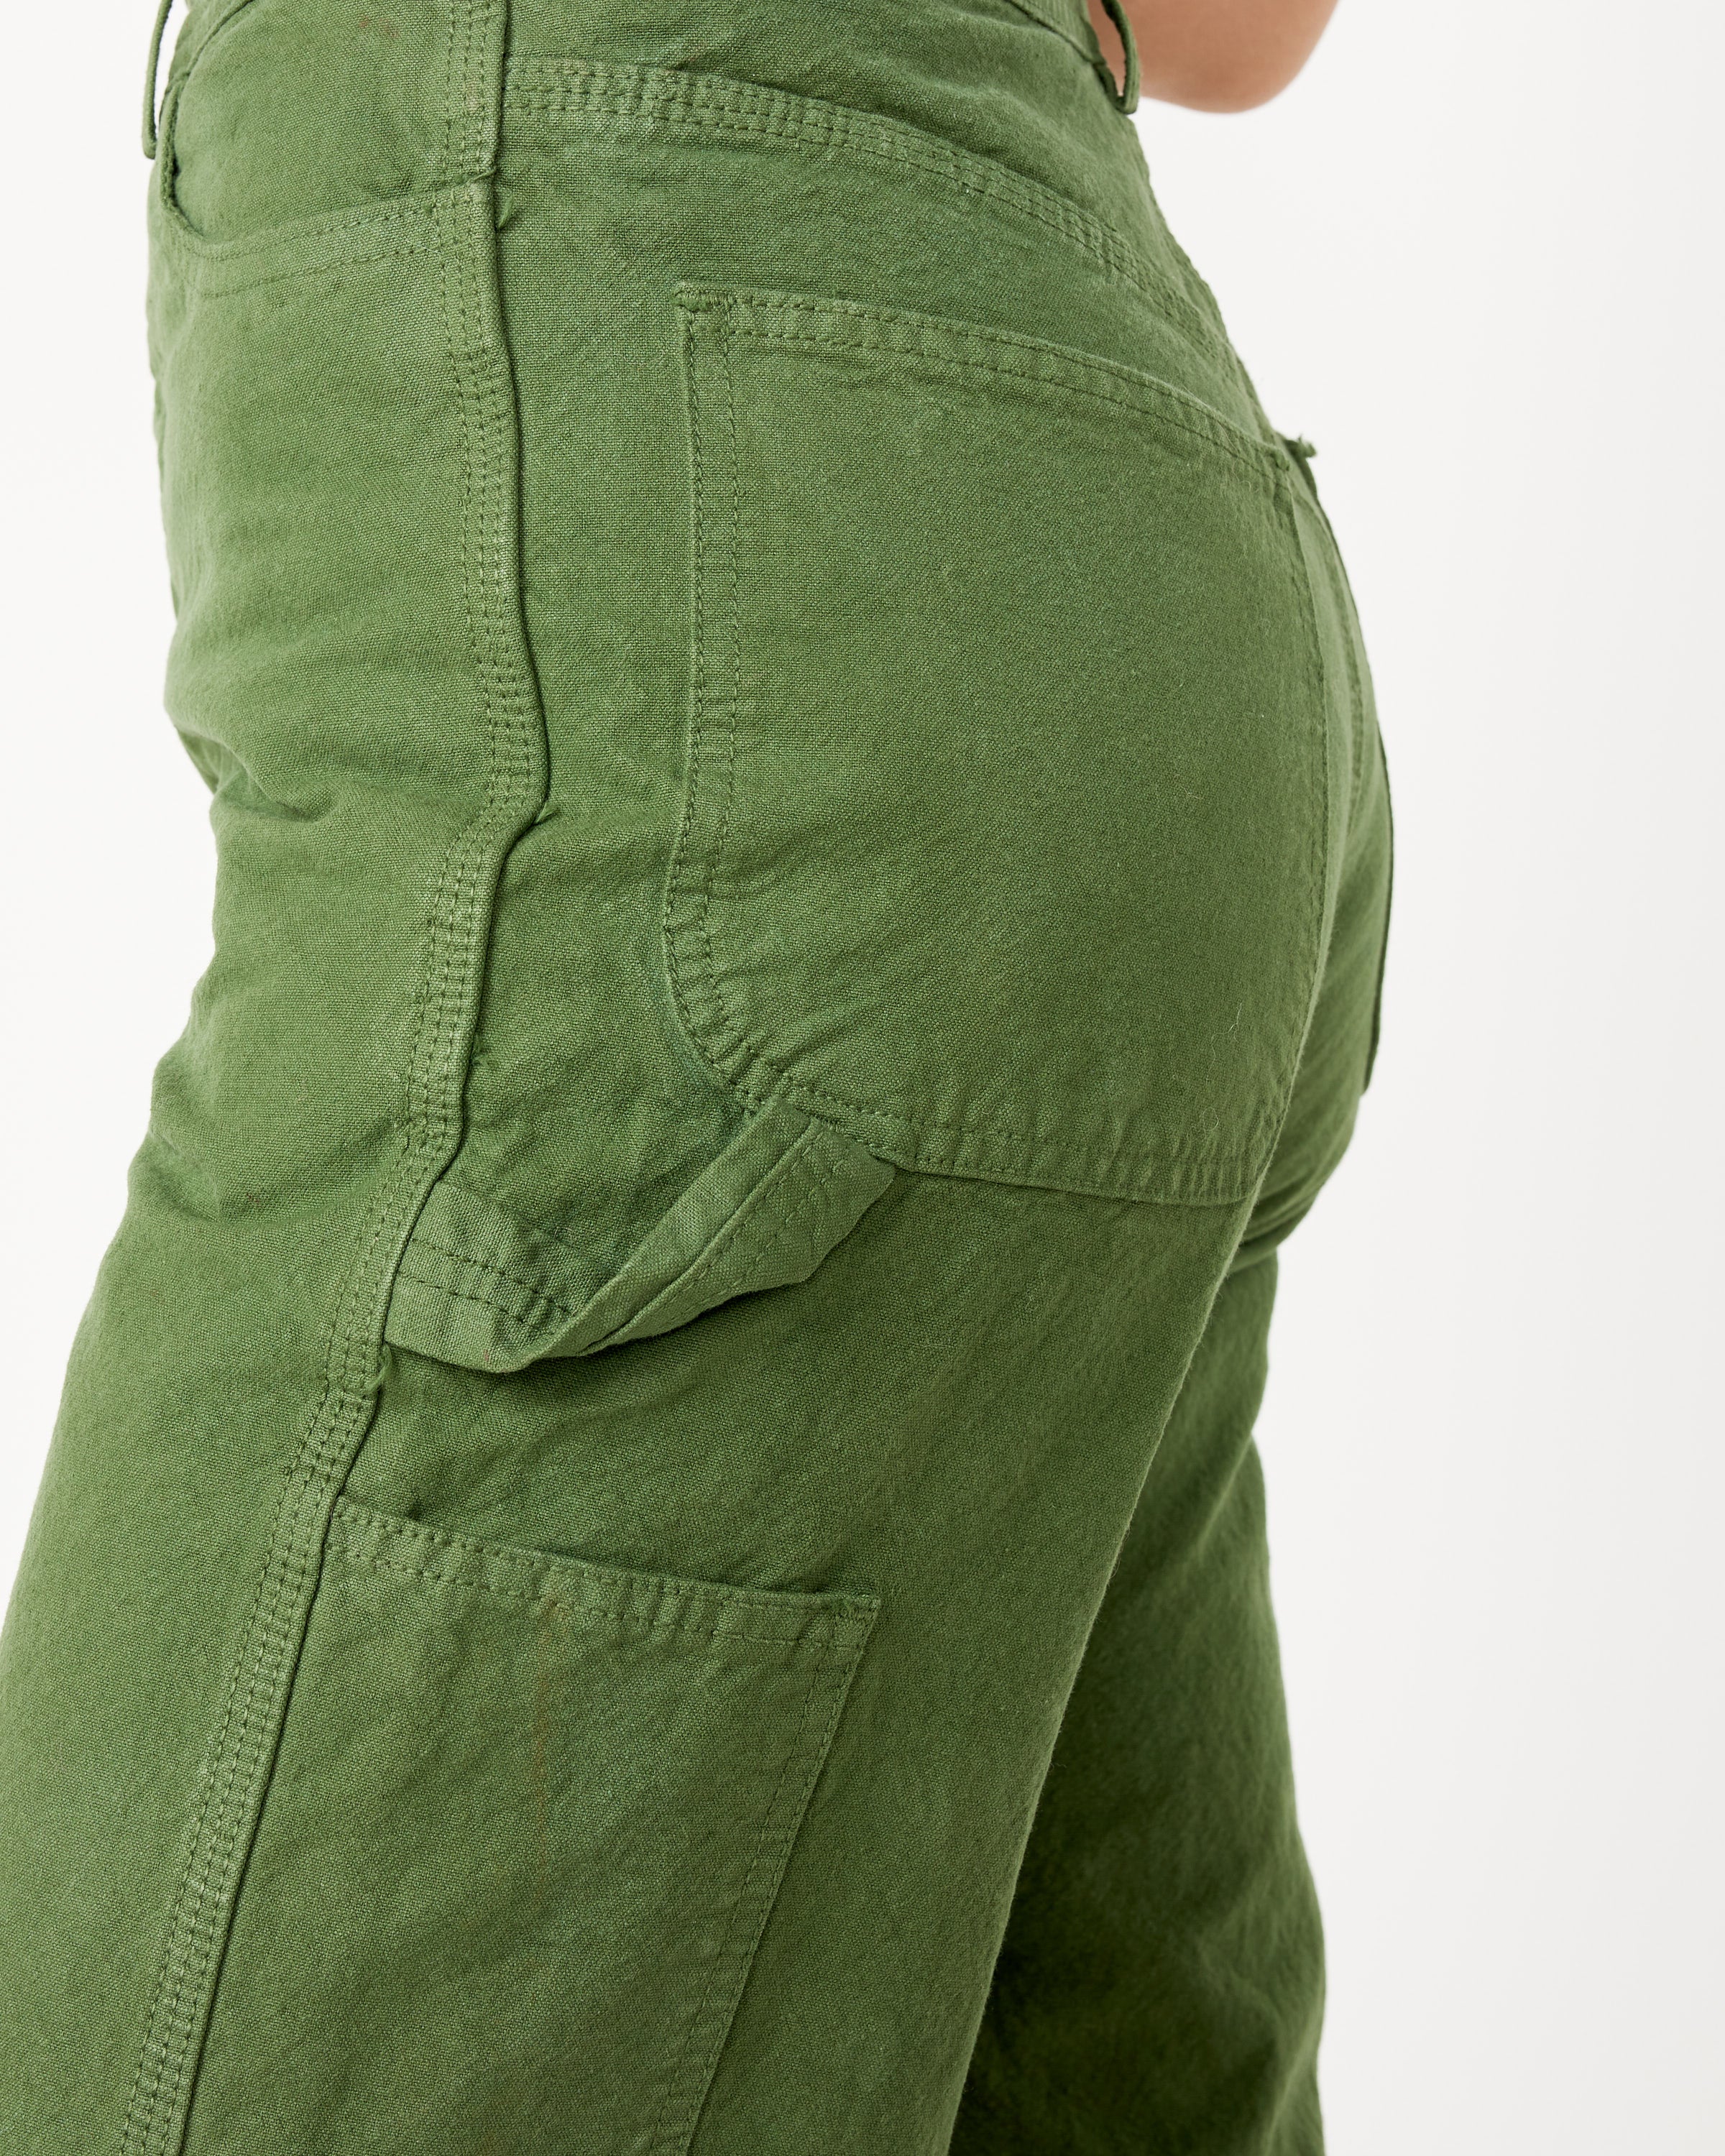 Handy Pant in Olive